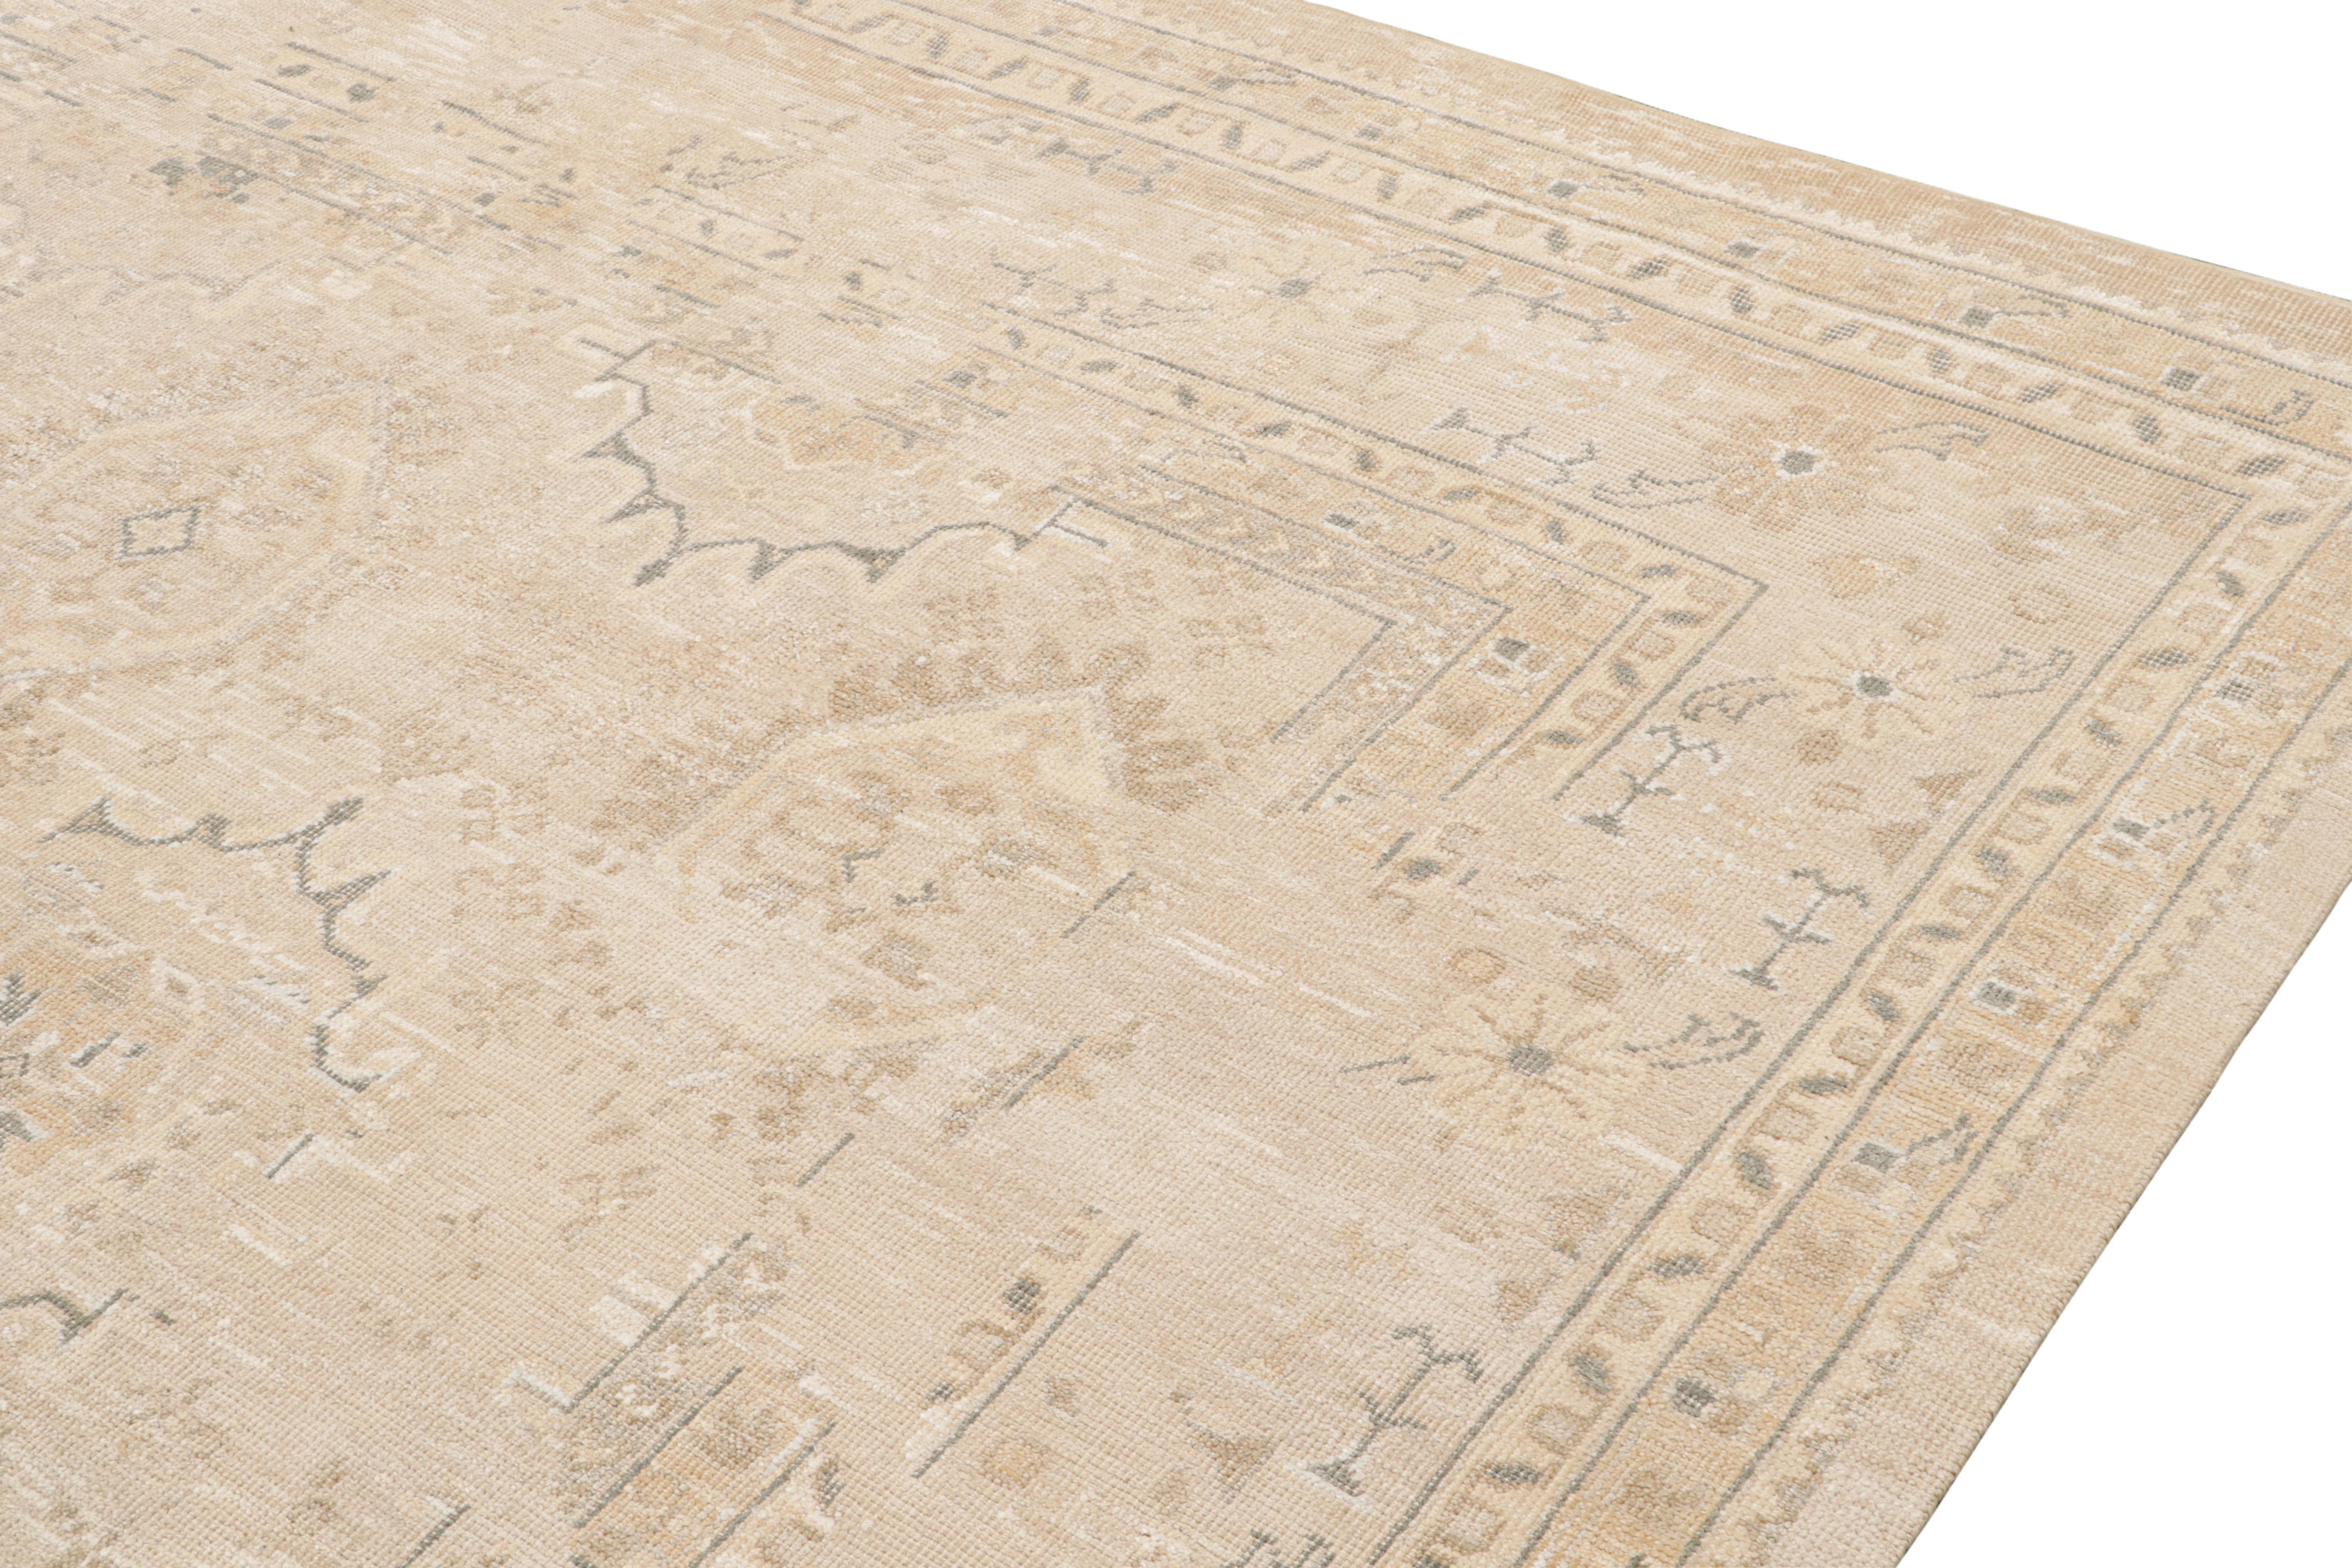 Rug & Kilim’s Oushak Style Rug in Beige & grey Geometric Patterns In New Condition For Sale In Long Island City, NY